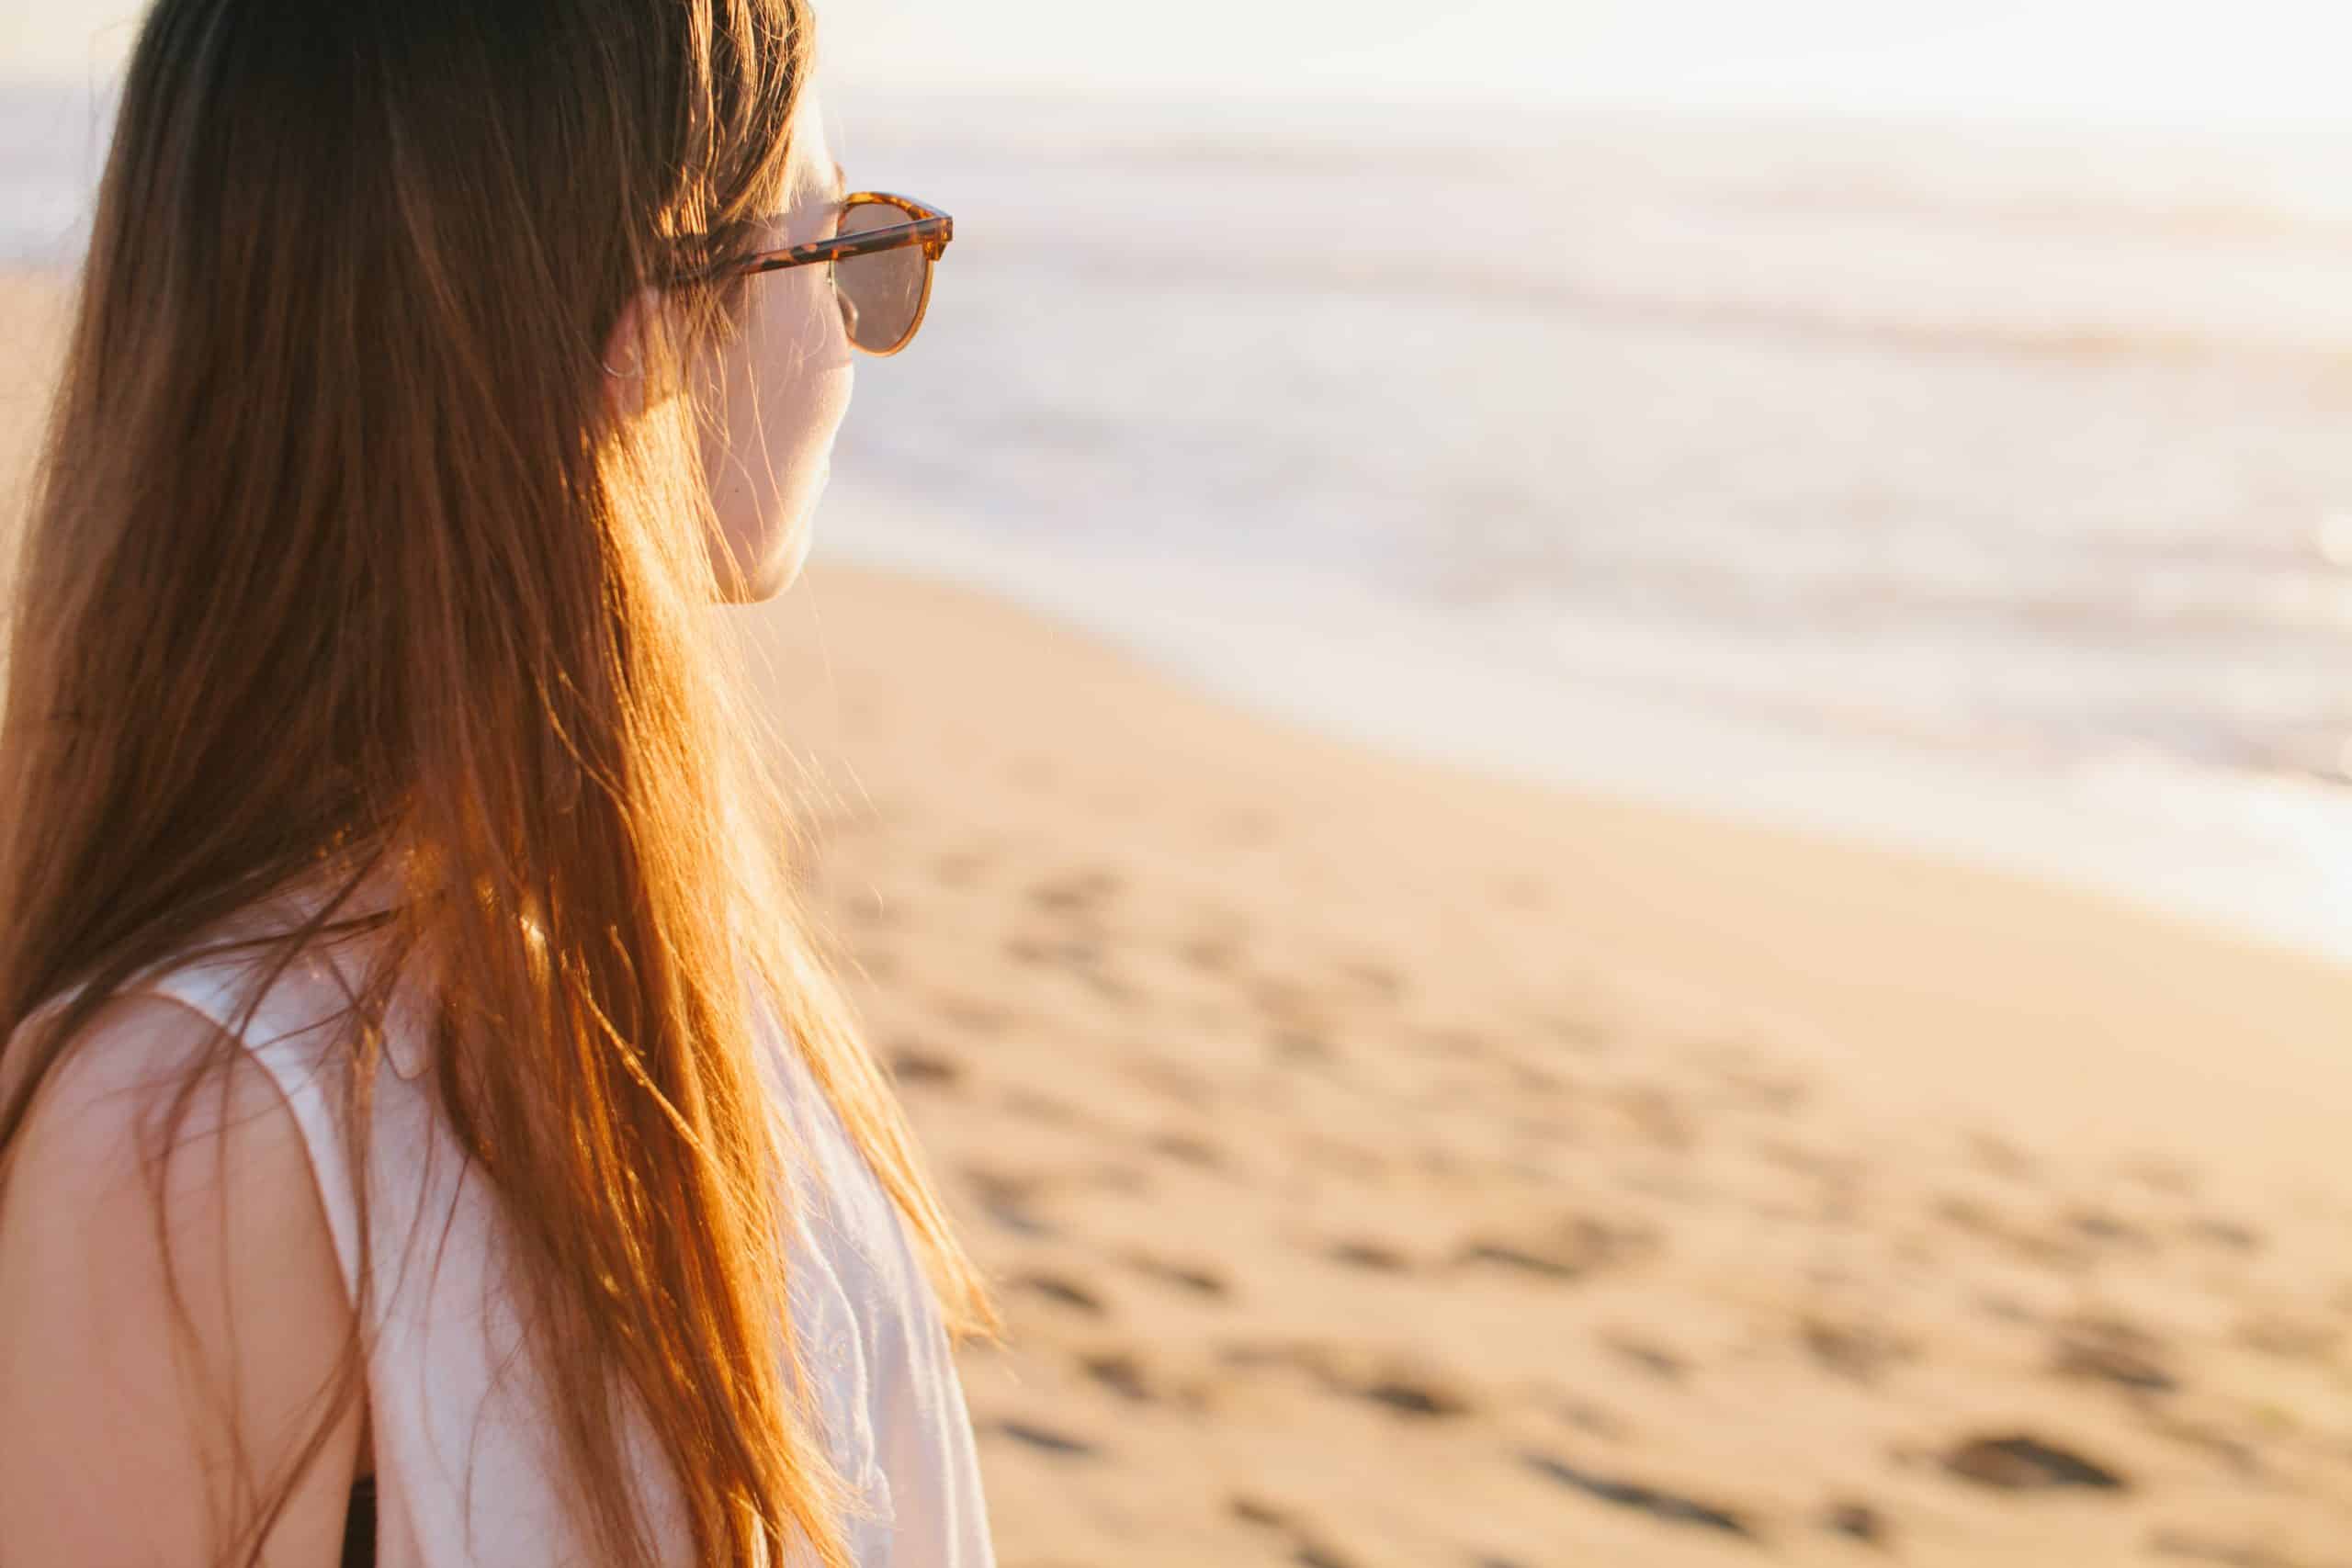 Woman with long hair and sunglasses looking out at the ocean from a sandy beach at sunset near a Newport RI hotel.